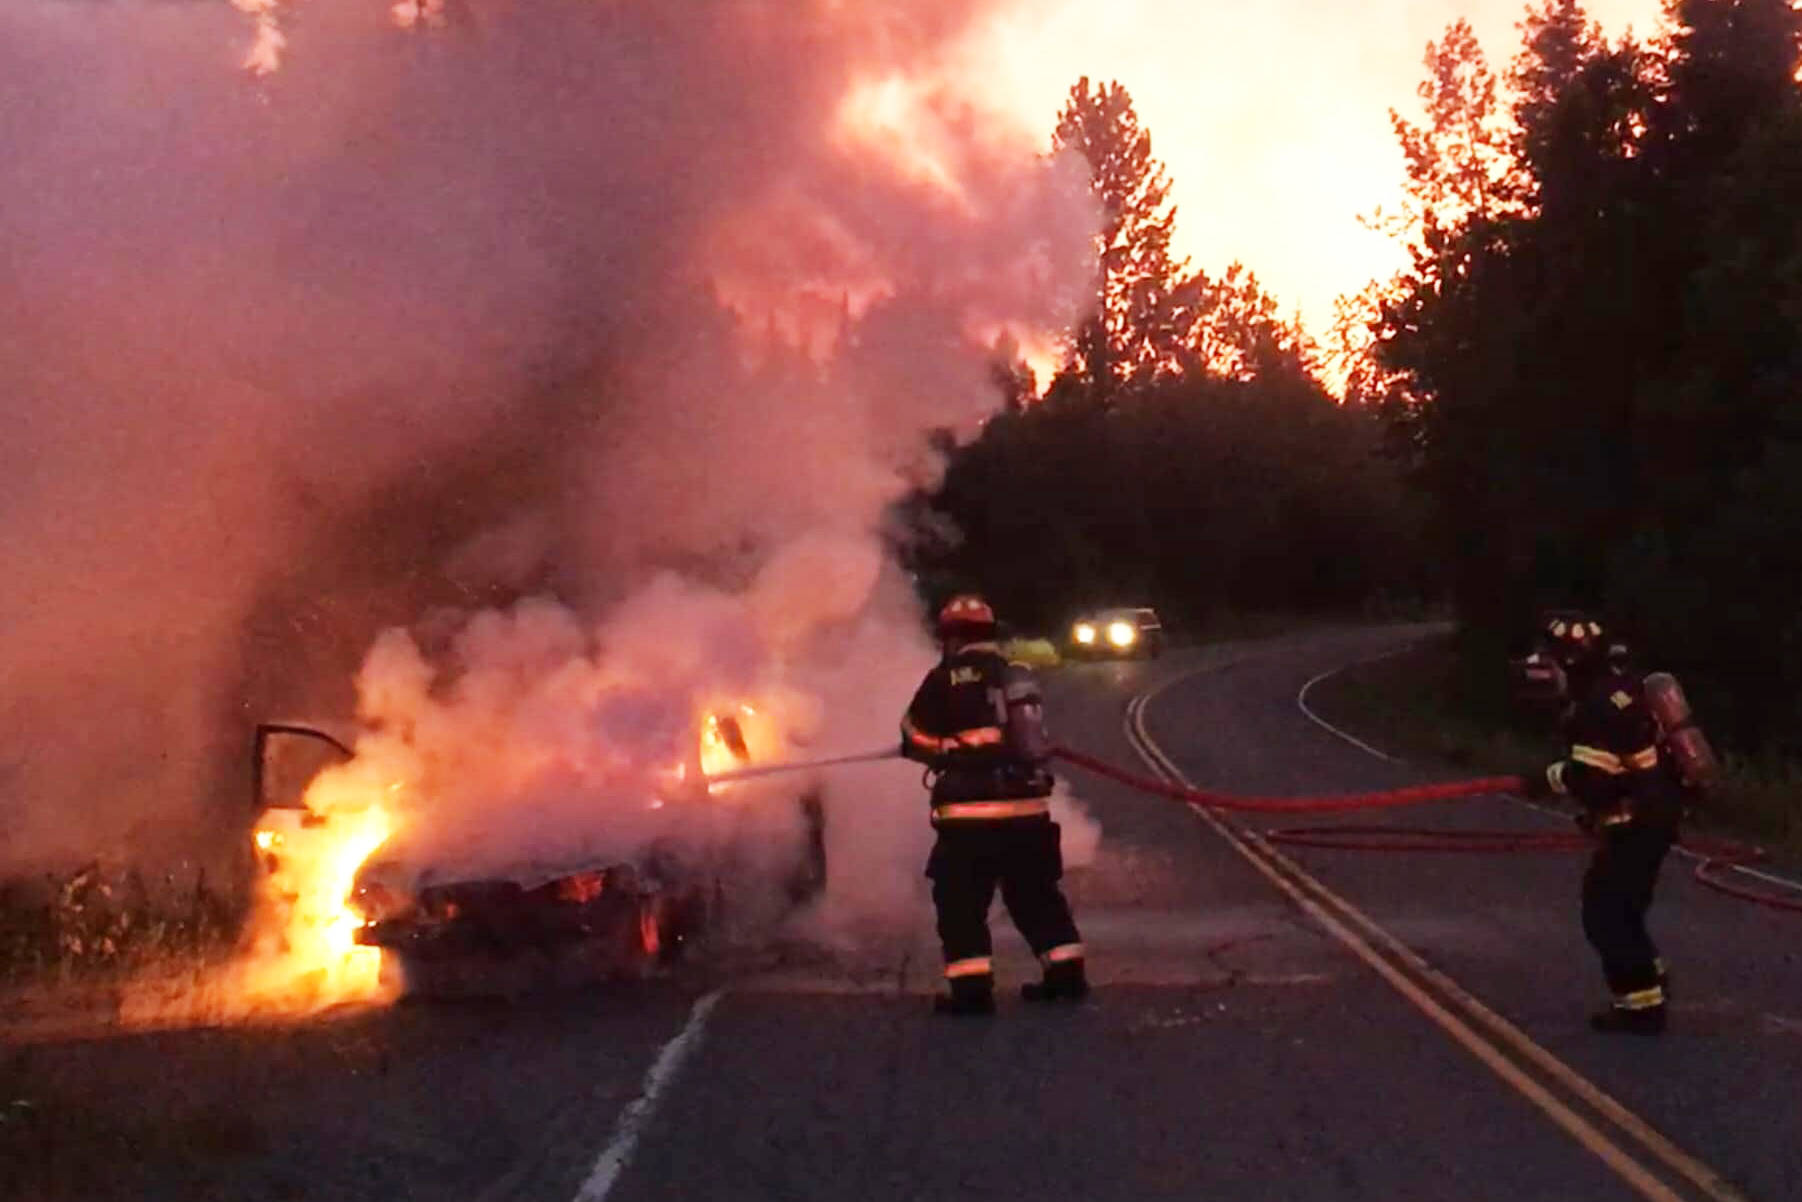 Anchor Point Fire and EMS crews put out a vehicle fire at about 11:45 p.m. Sunday, July 7, 2019, on the Old Sterling Highway near Anchor Point, Alaska. (Photo by Jon Marsh/Anchor Point Fire and EMS)